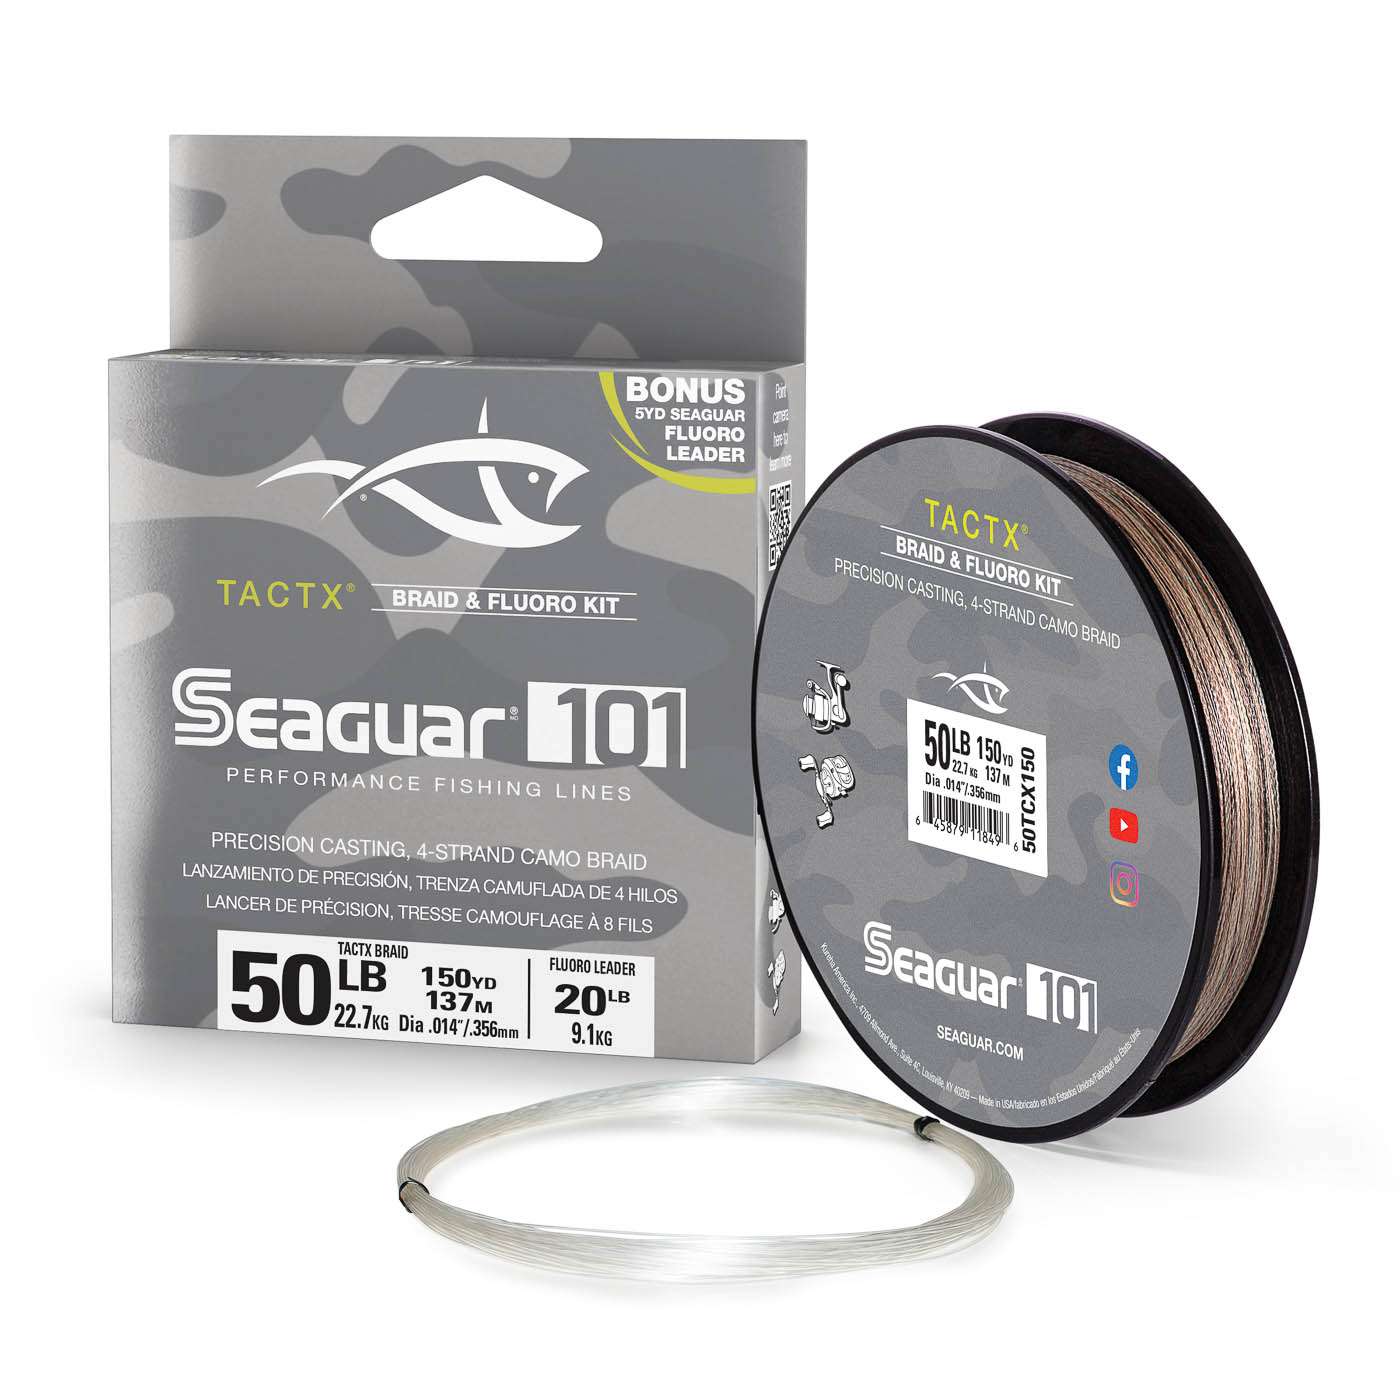 <p><strong>Seaguar TactX</strong></p><p>Performance features make this braid a perfect choice for everyday anglers. TactX is engineered to maintain its perfectly round shape and stay firm to minimize rod tip wrapping and wind knots. It packs tightly on the reel without cutting into itself to help reduce backlashes too. This is an all-around braid that combines excellent castability, abrasion resistance, and overall strength with a âpebbleâ texture to add durability and help it cut through vegetation. Itâs woven from multi-color, earth-tone strands that are heat-set for better color retention and to create a natural camo color that reduces line visibility. Starting at $16.99. <a href=